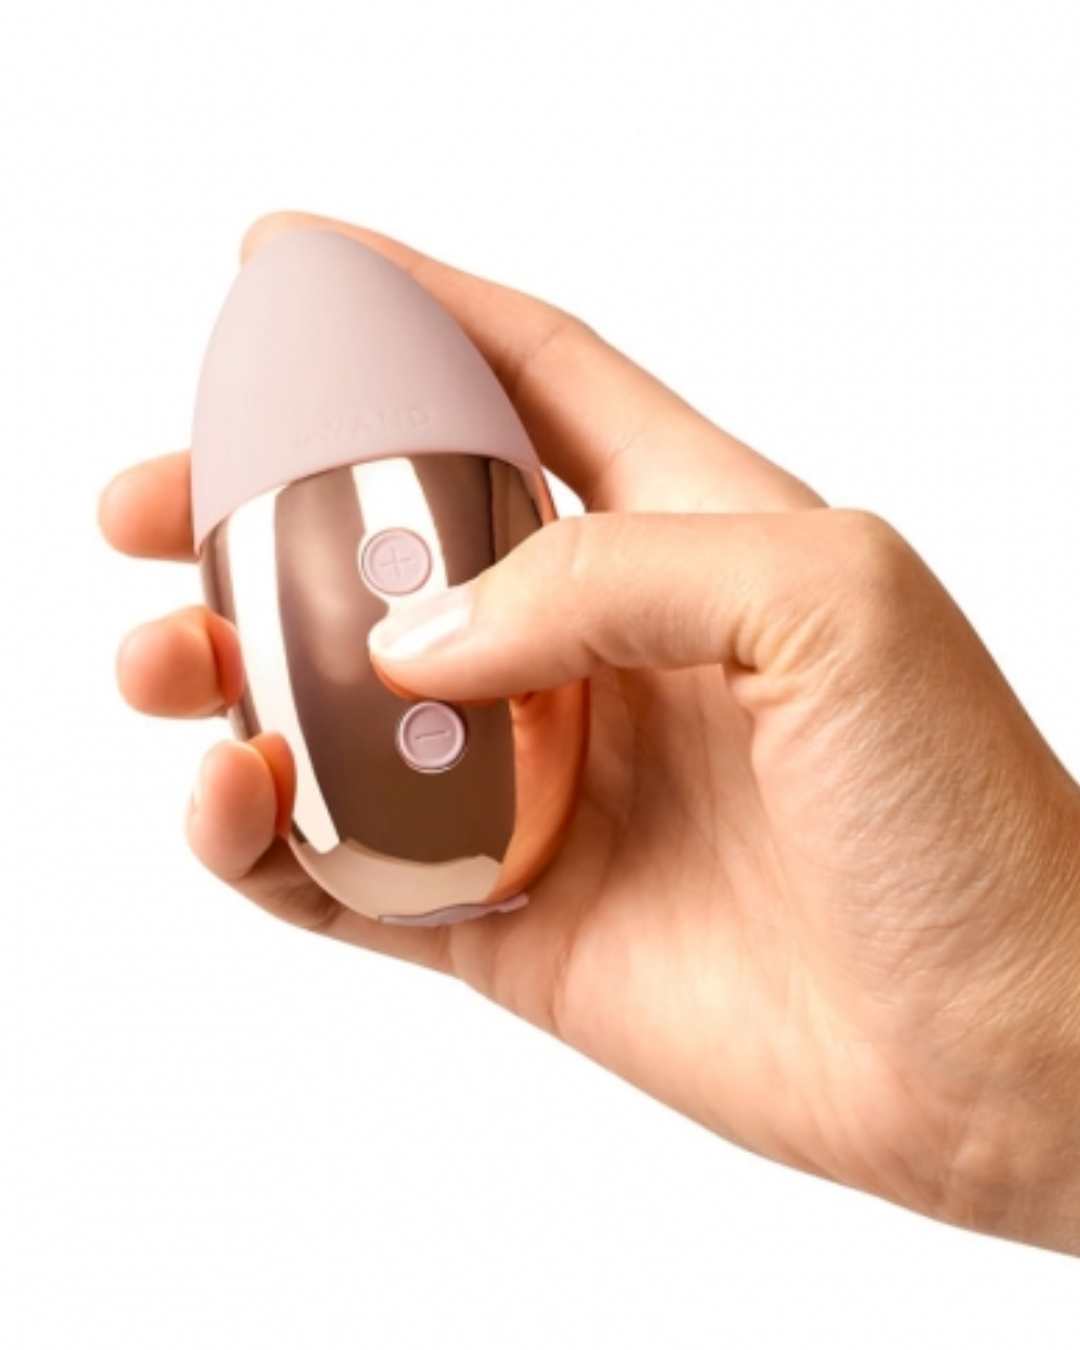 Le Wand Point Weighted Waterproof Silicone Lay-On Vibrator - Rose Gold held in a hand